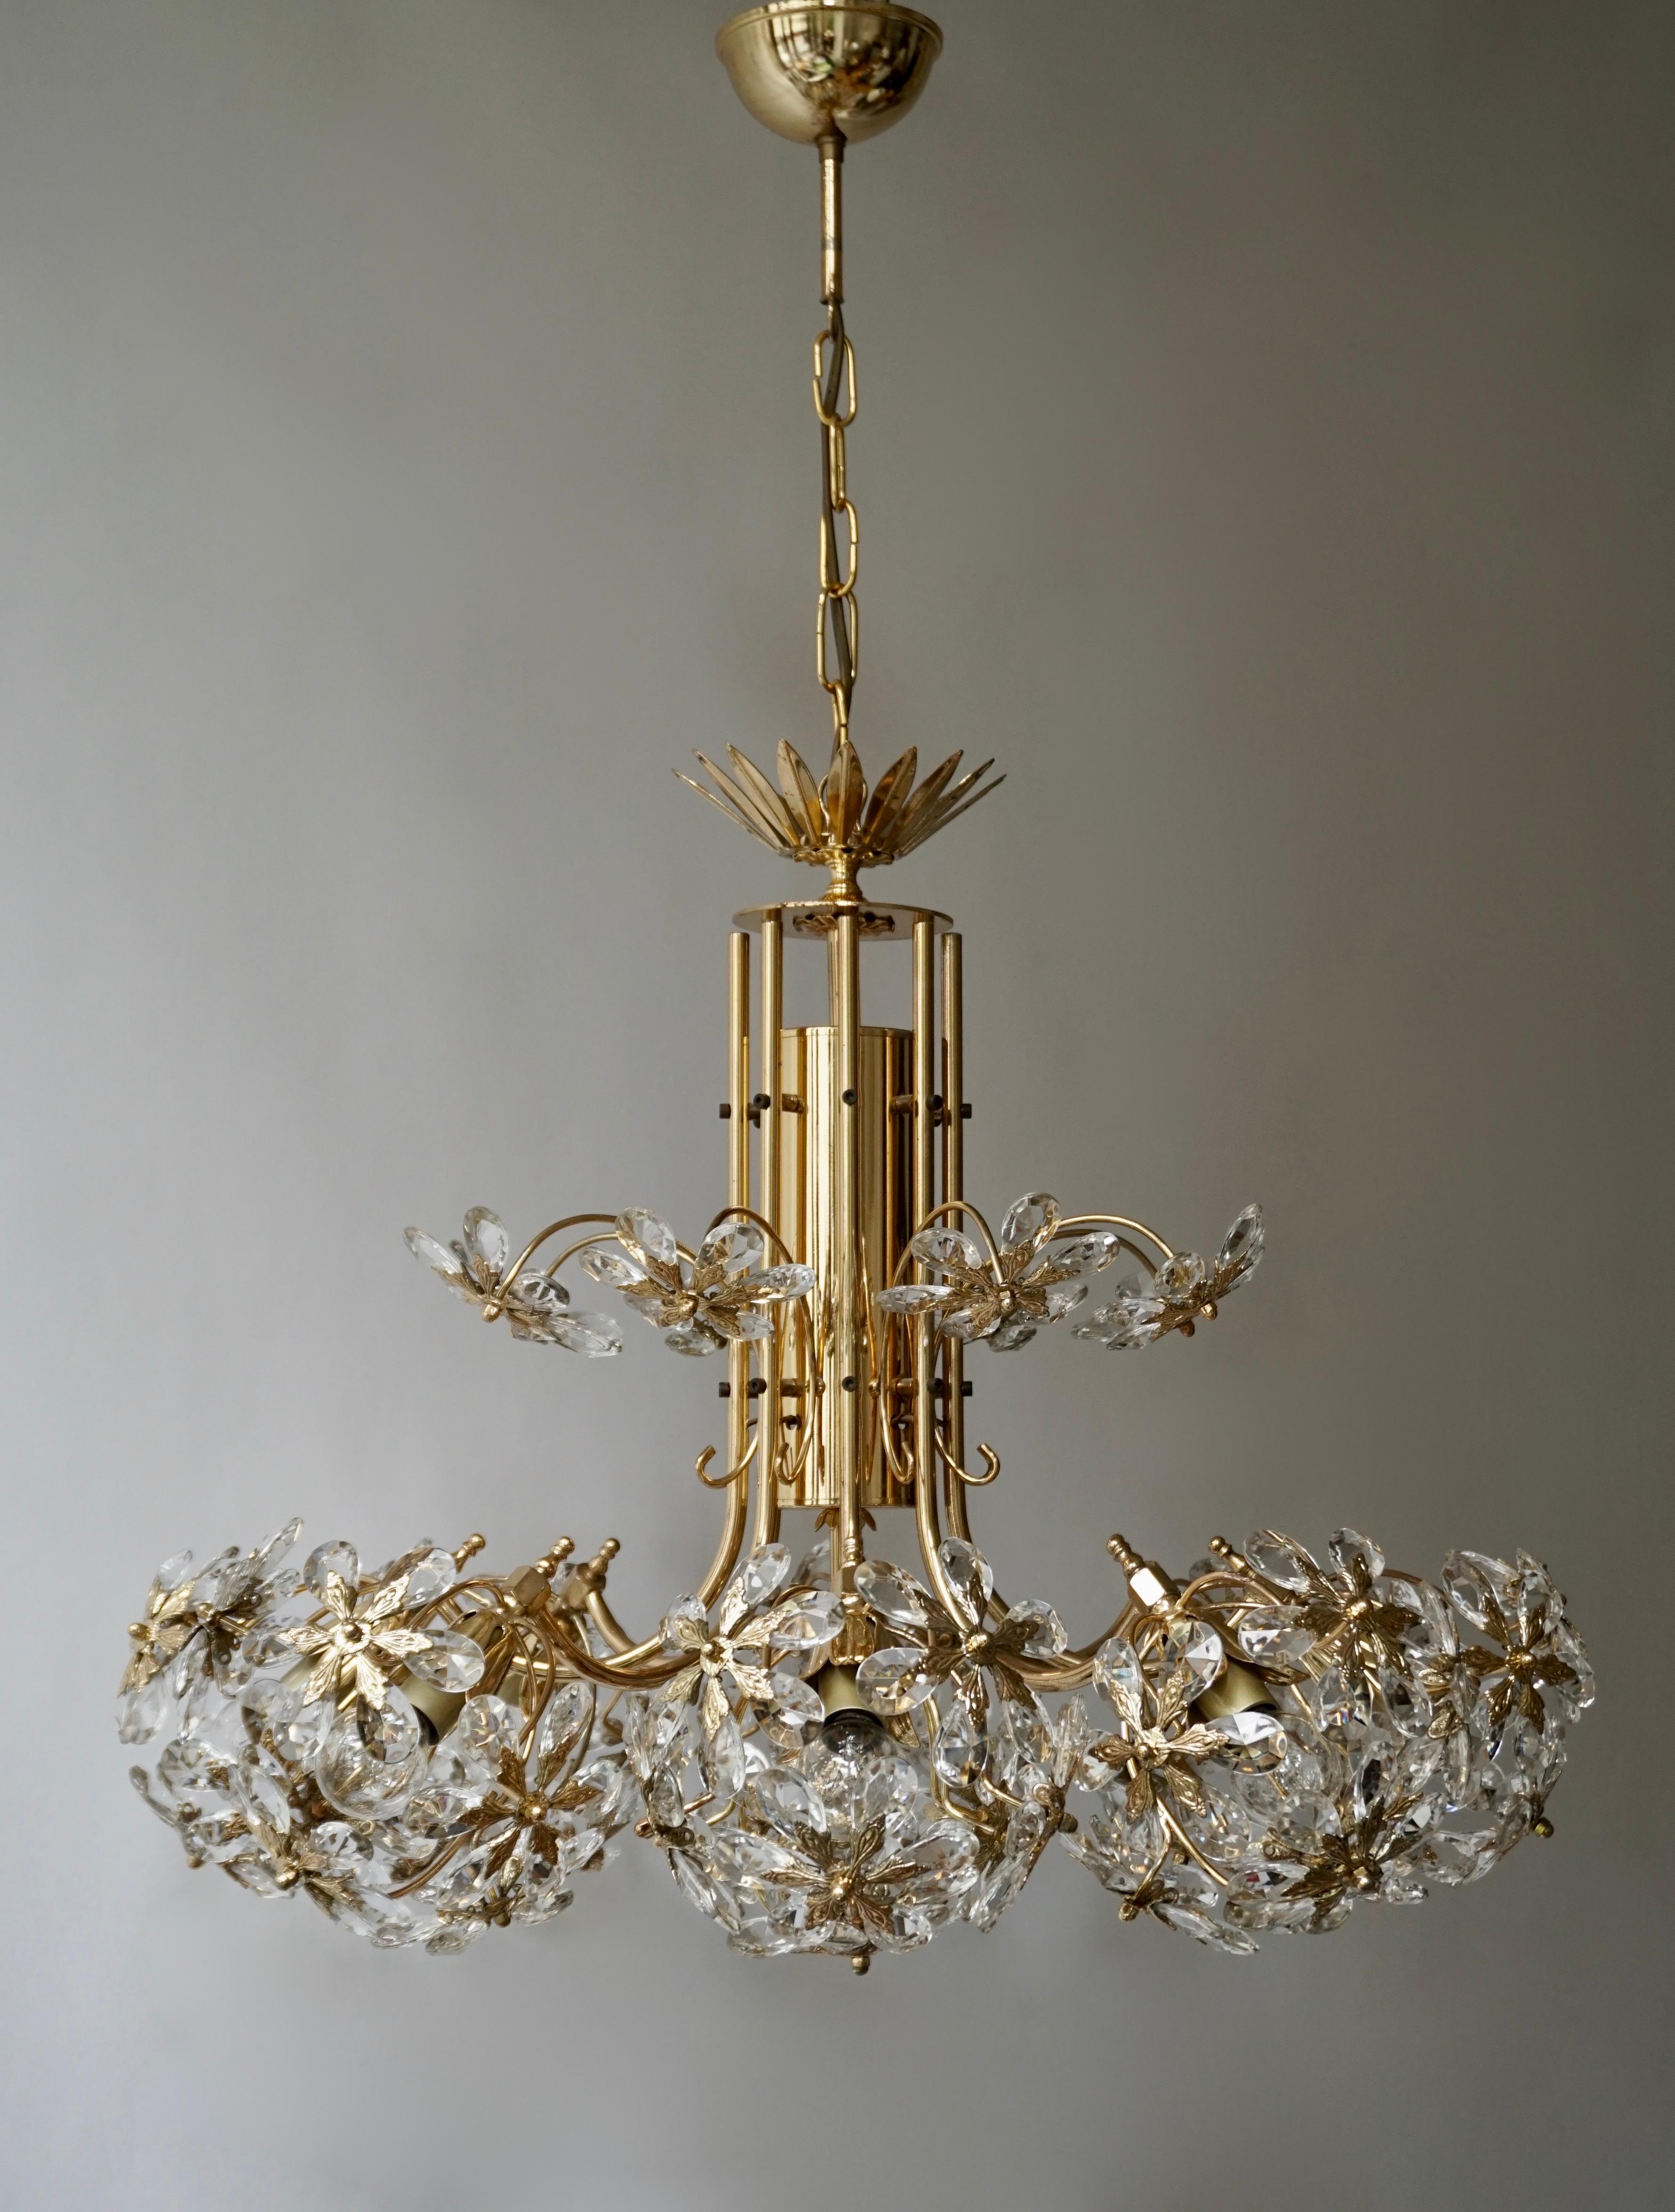 Beautiful petite crystal flower ball chandelier made by Palwa, Germany, circa 1960-1970. The chain-hanging length-adjustable chandelier has a delicate gilt metal wire construction, on top with 62 beautiful hand-cut faceted crystals in the shape of